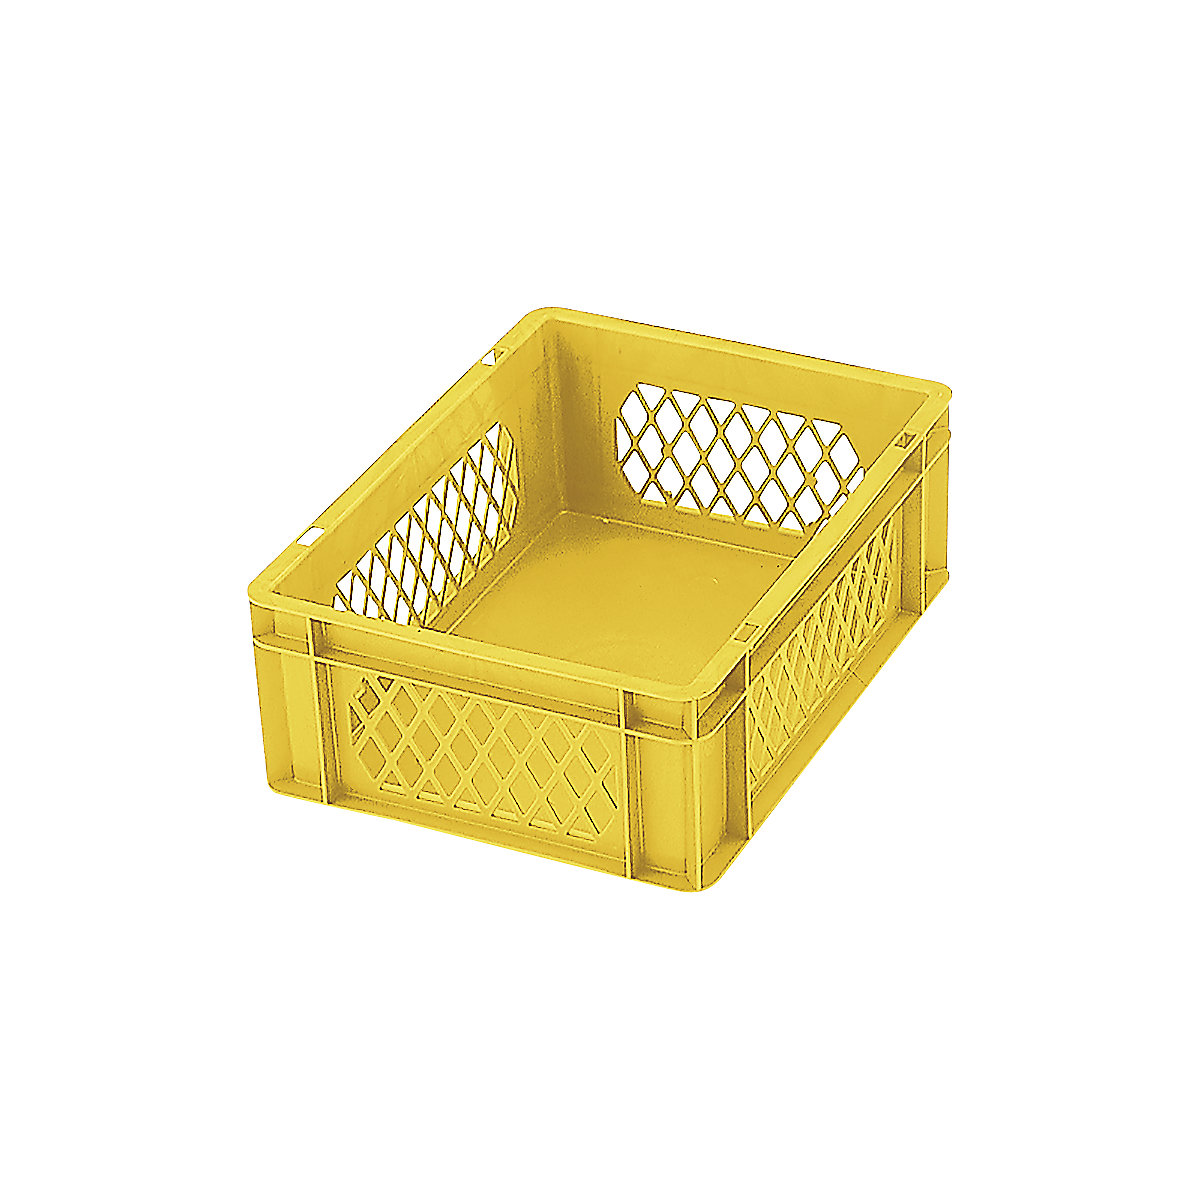 Euro stacking container, perforated walls, closed base, LxWxH 400 x 300 x 145 mm, yellow, pack of 5-7